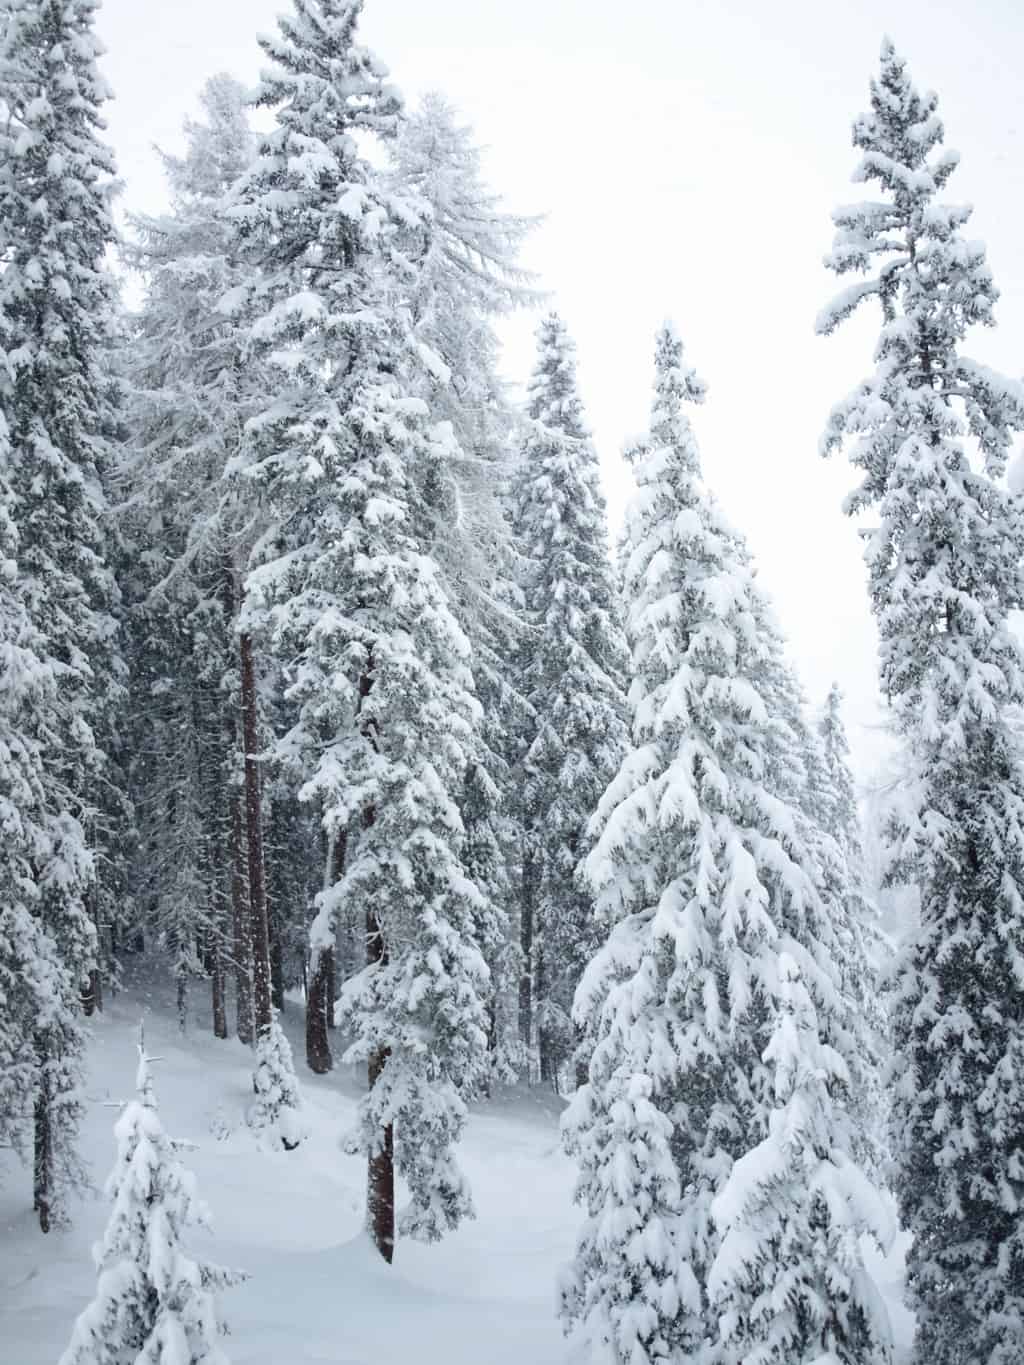 Forest in snow inspiration from our recent trip to Austrian Alps